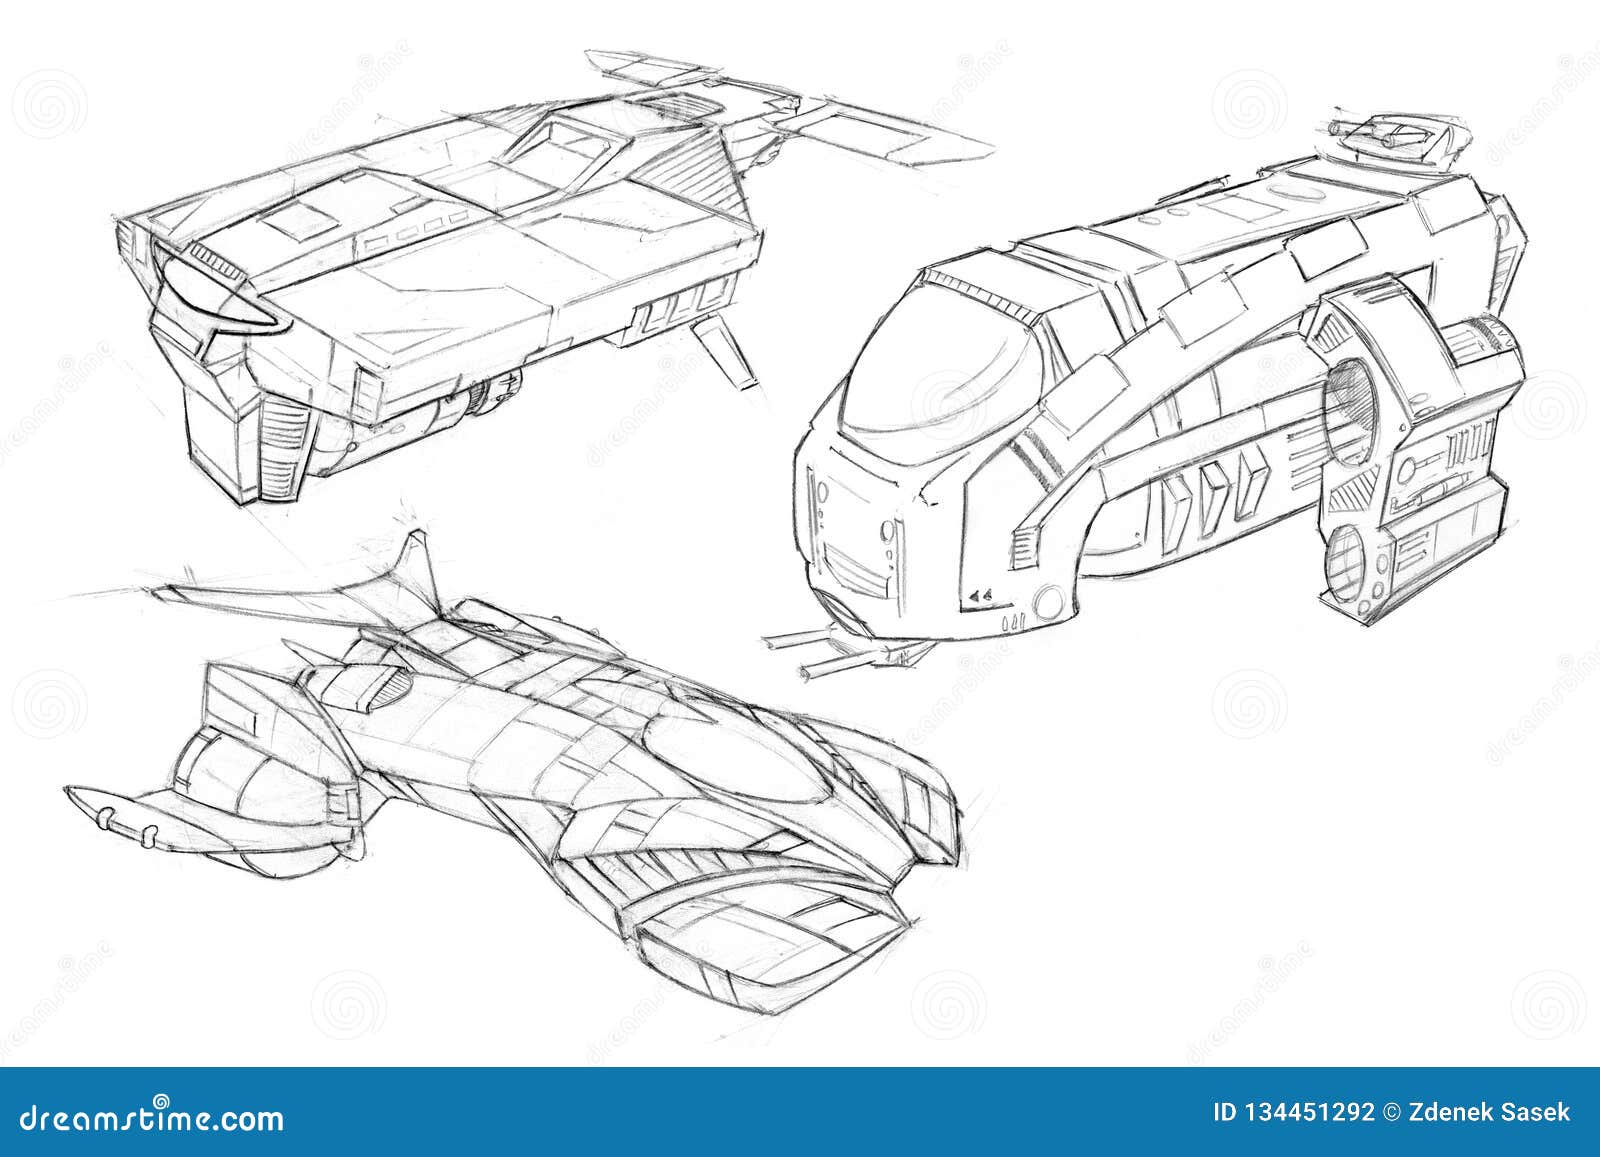 Drawing Mech Designs and Futuristic Car Designs  Doodlers Anonymous